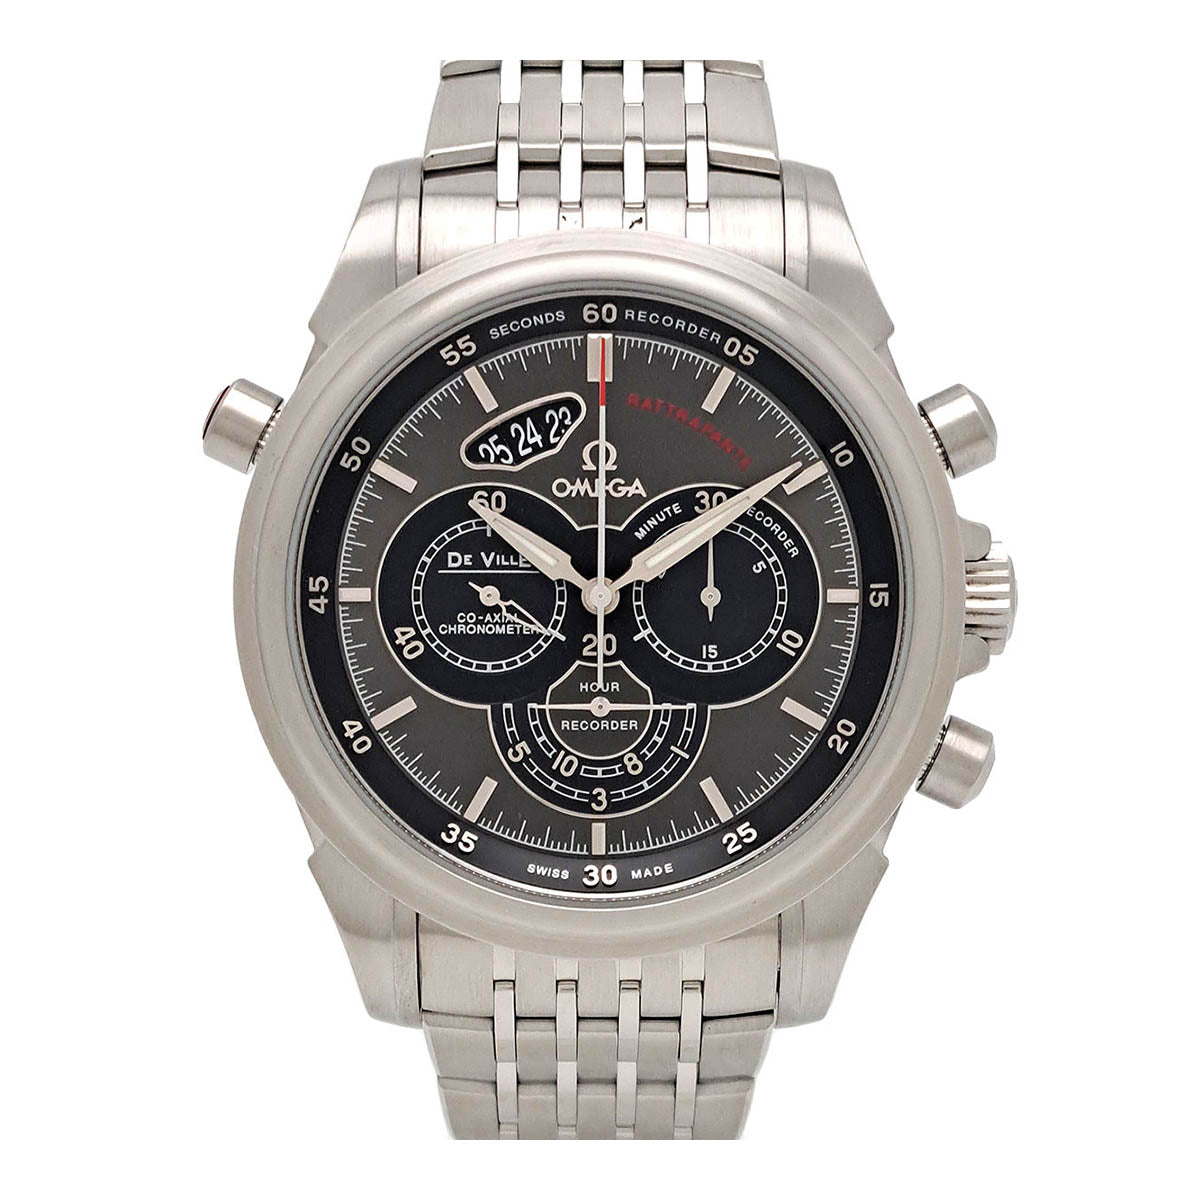 Omega Deville Chronoscope Rattrapante Chronograph Men's Stainless Steel Automatic Watch 422.10.44.51.06.001